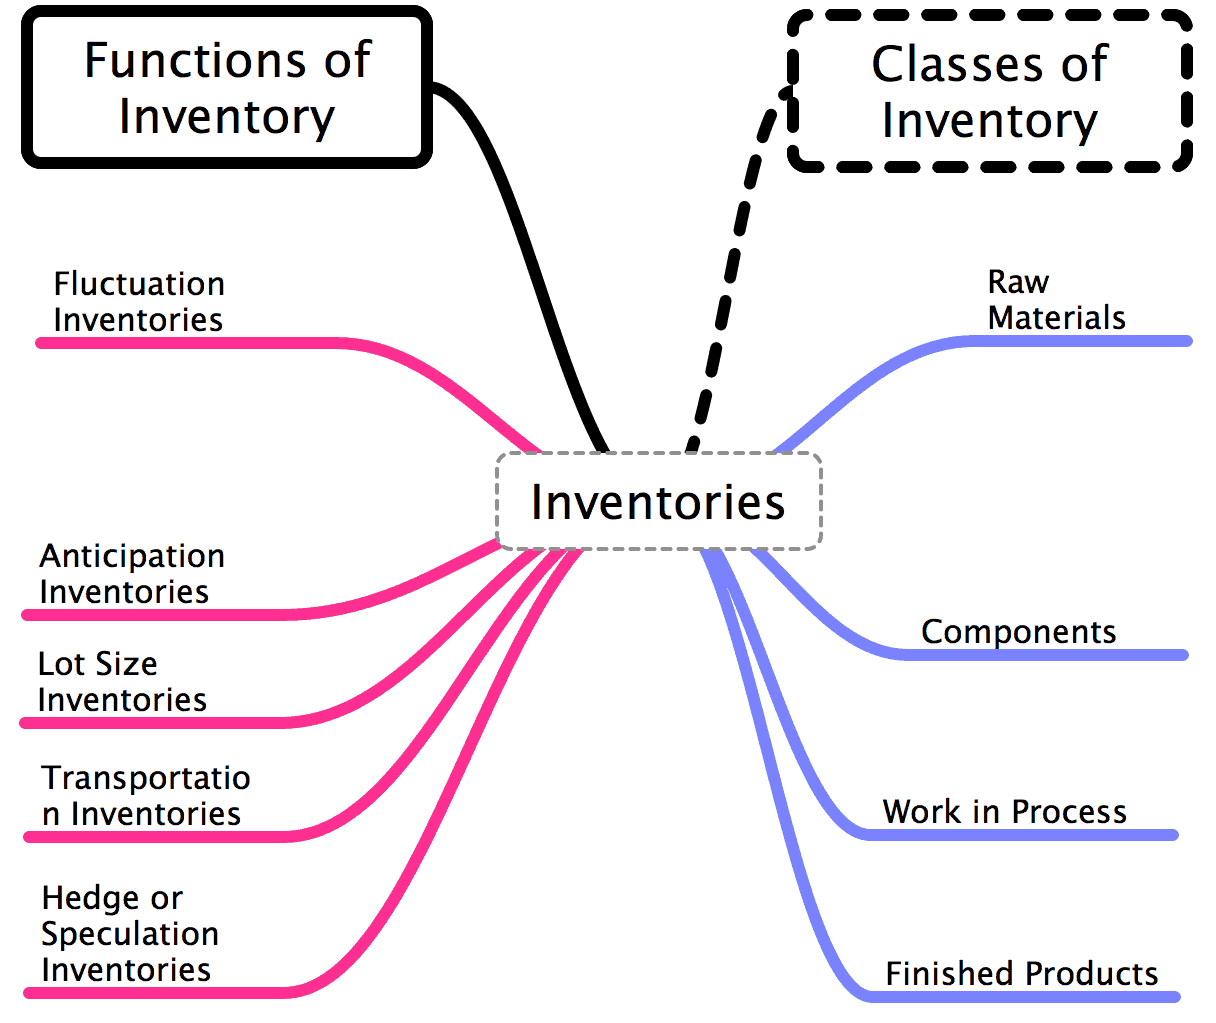 ending inventory meaning